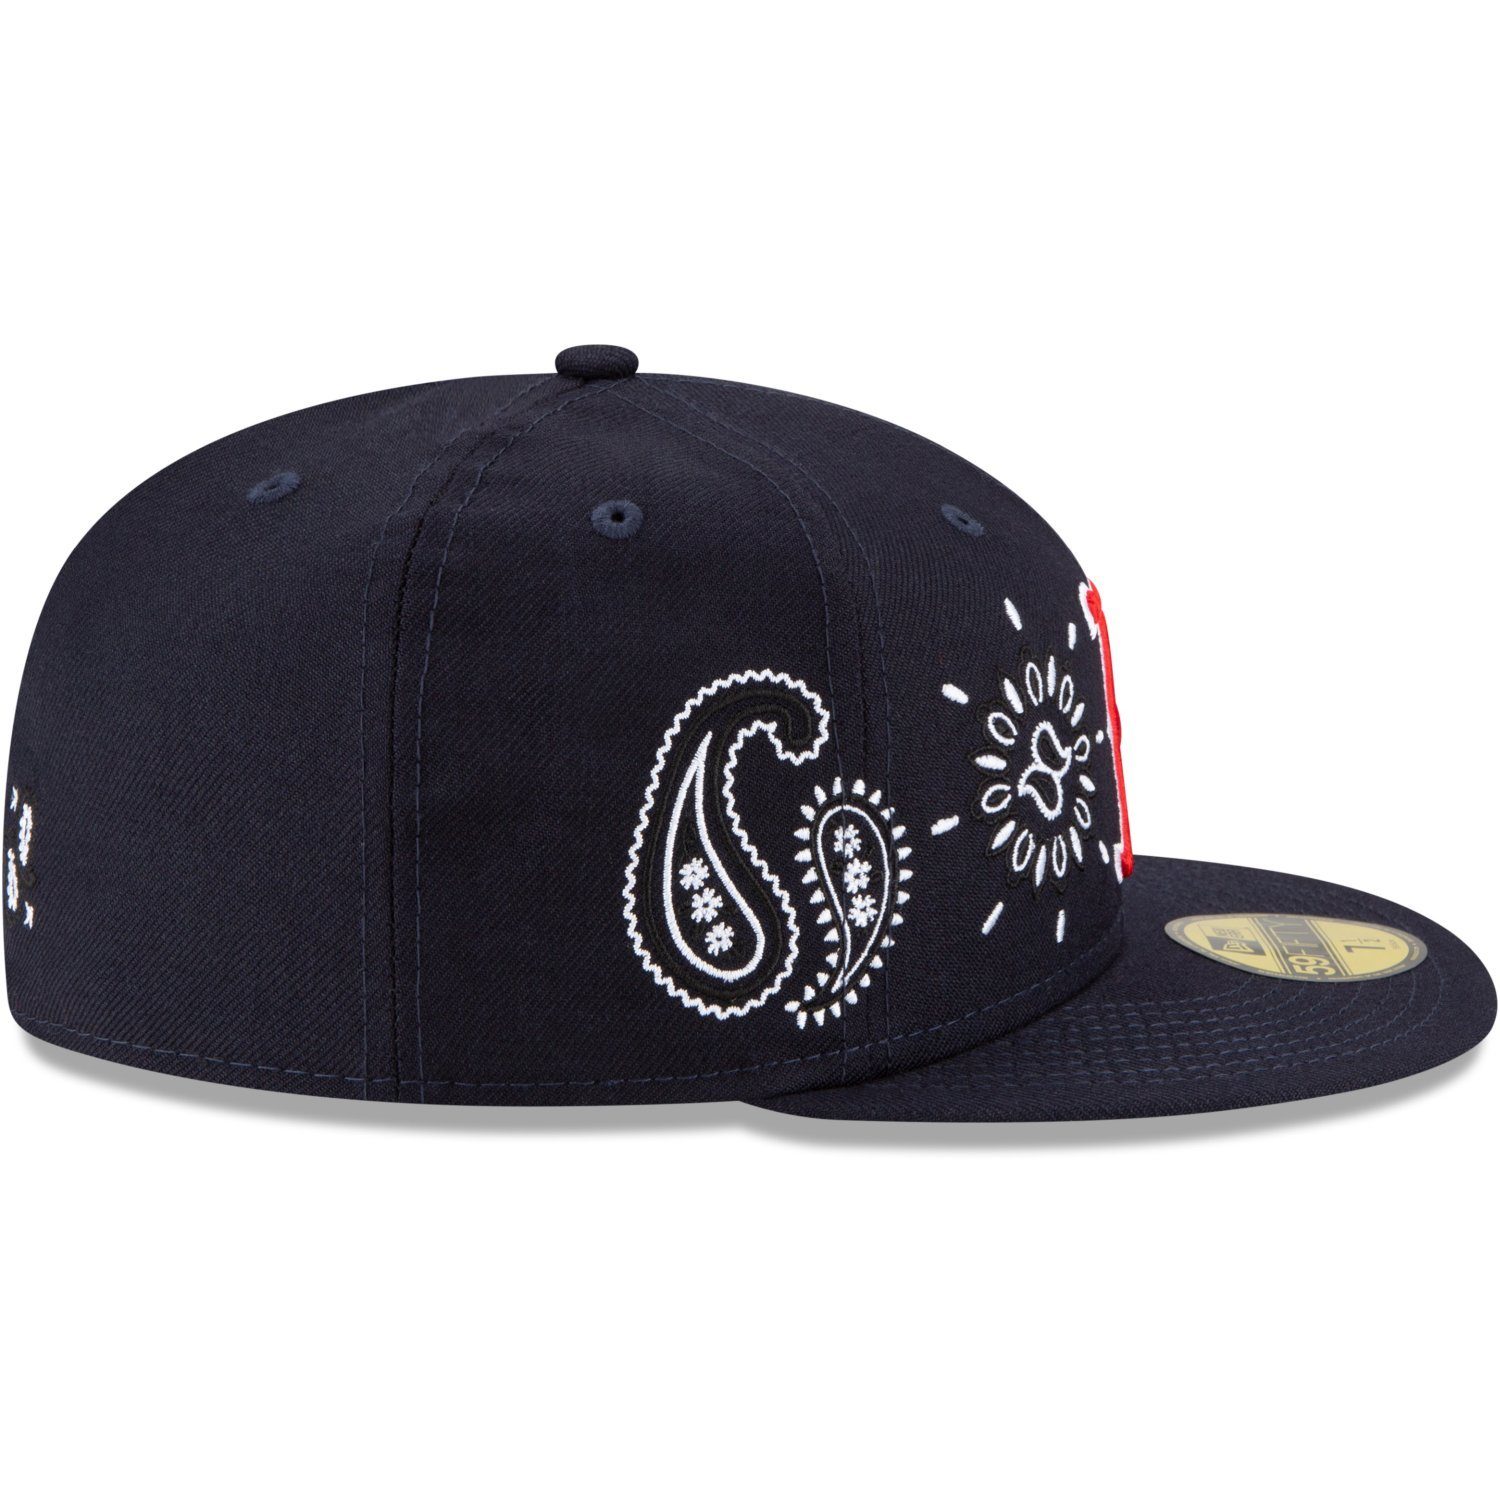 New Era Fitted Cap Red 59Fifty Sox PAISLEY Boston